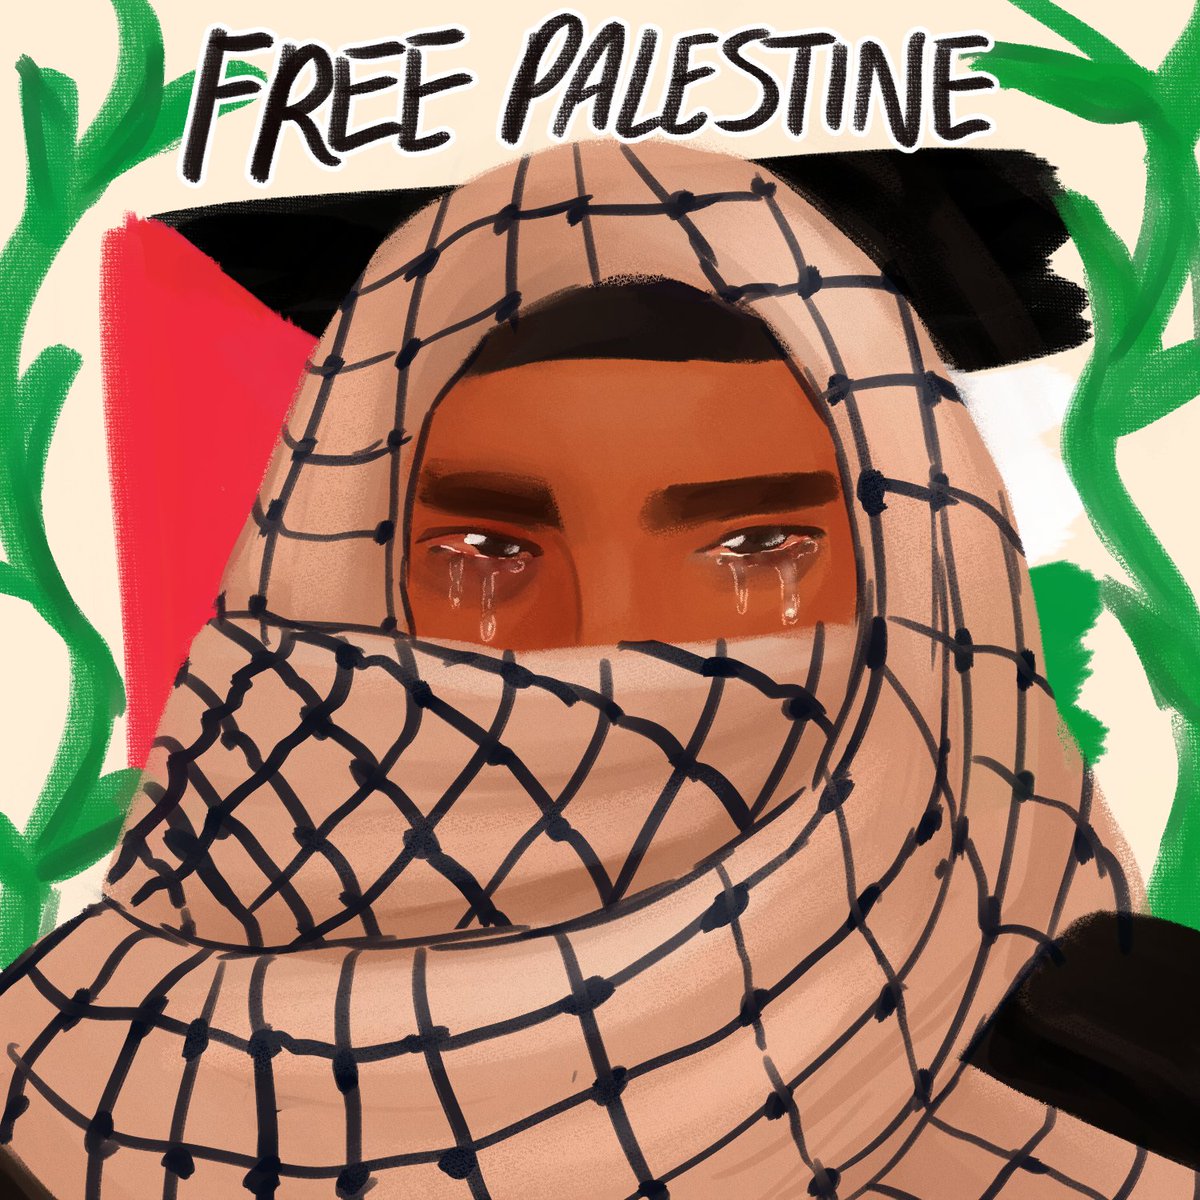 hi. i will be participating in the strike tomorrow and will not be posting anything except stuff relating to palestine, specifically about rafah and isr@el carrying out this genocide there, here on main. i urge you to do the same.
#RiseForRafah #AllEyesOnRafah